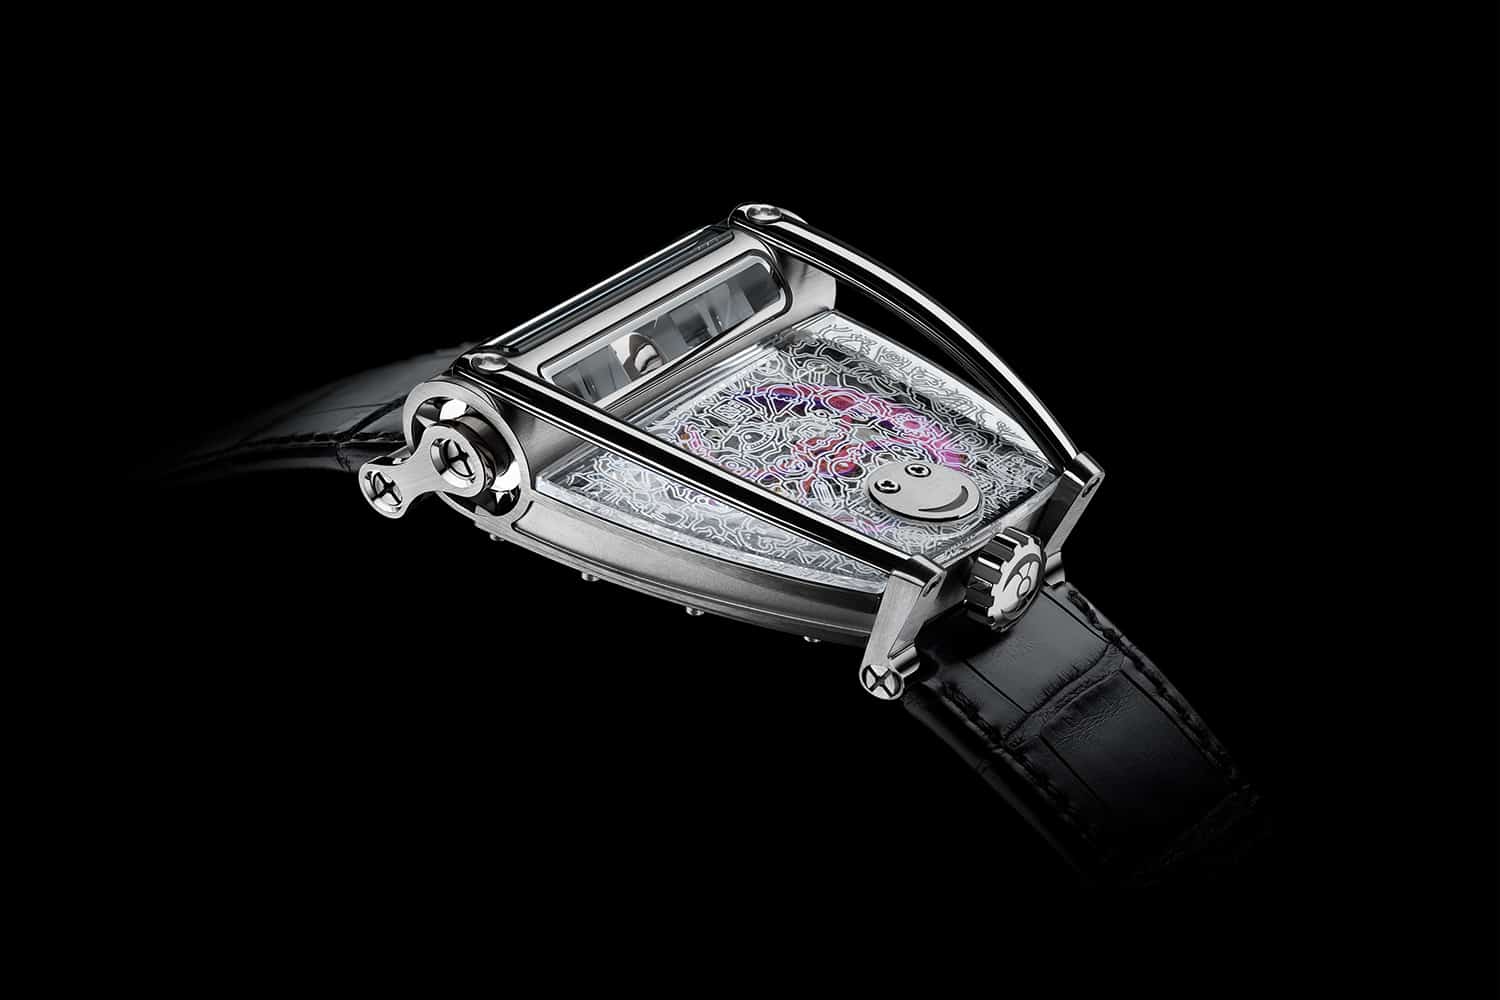 MB&F HM8 5